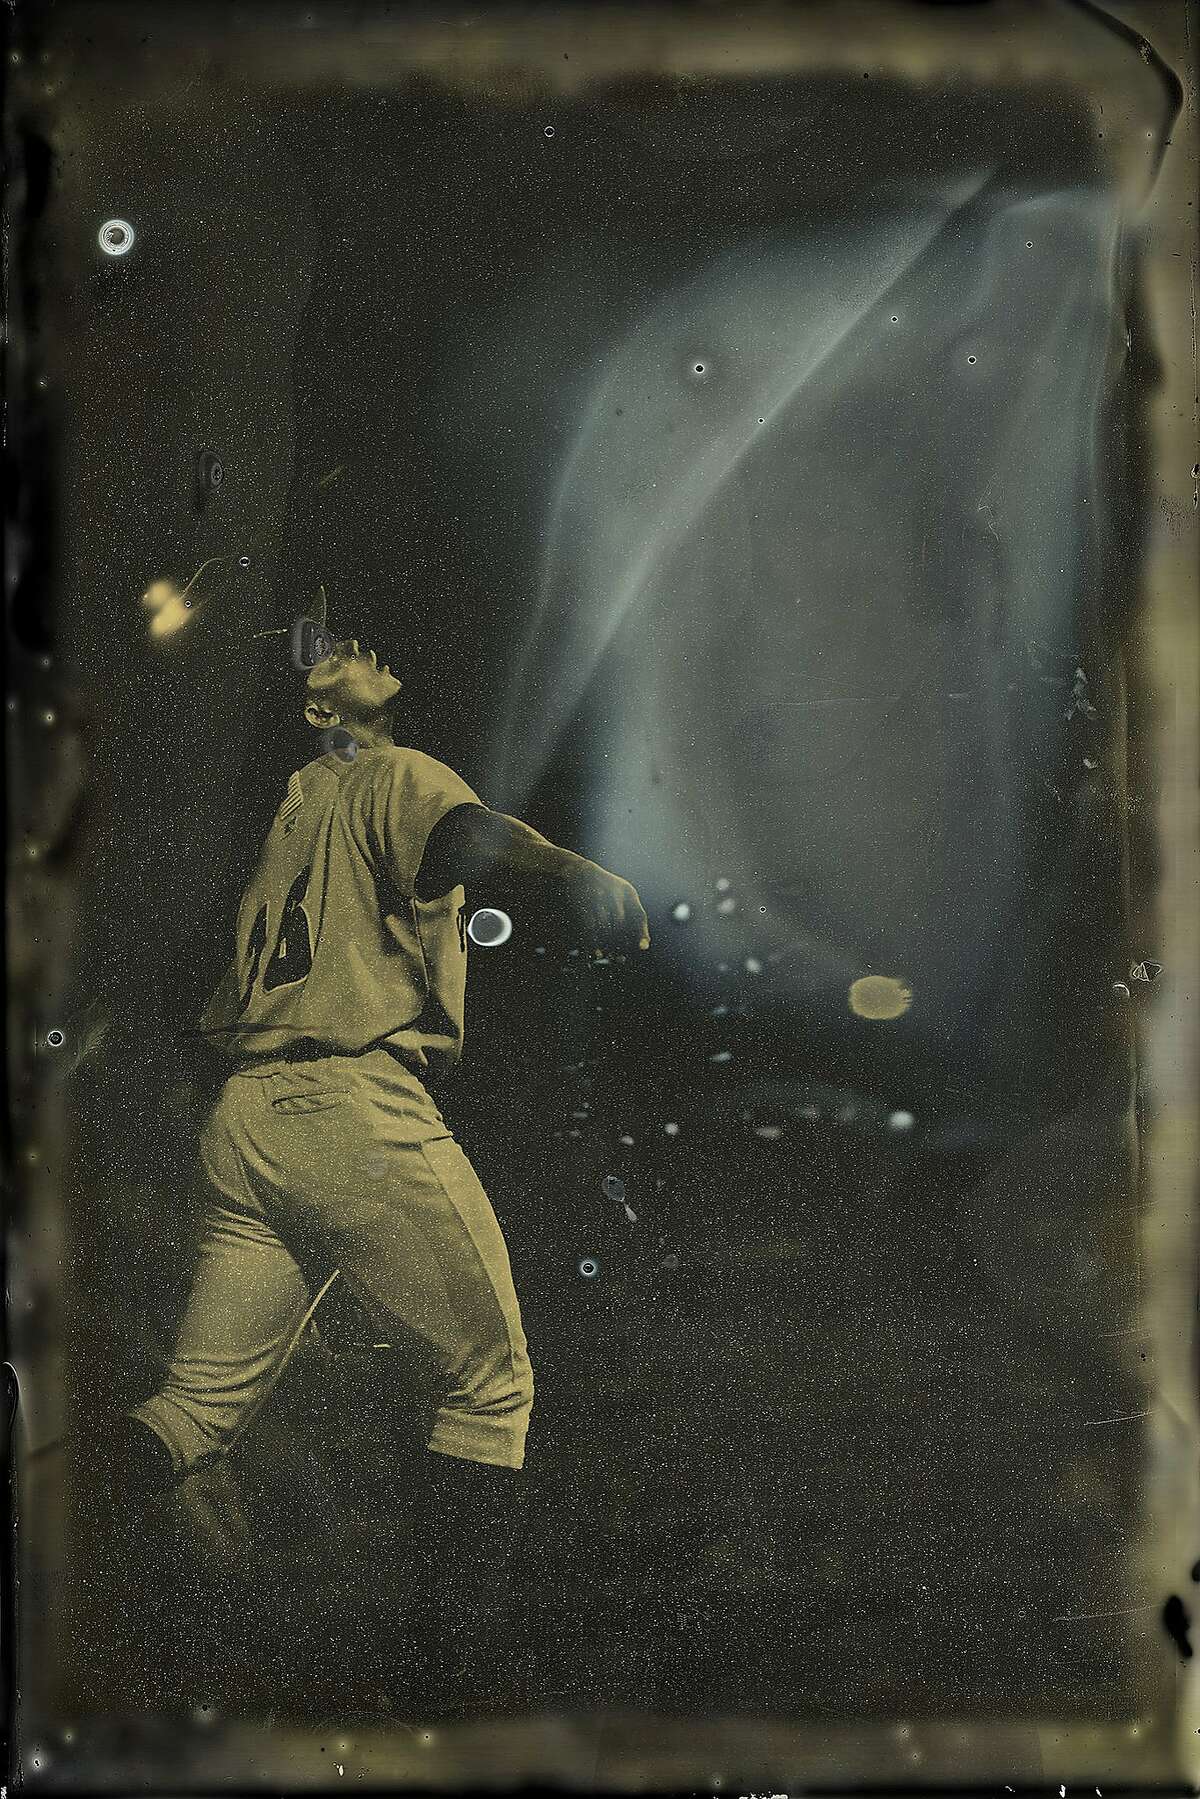 Photographer Tabitha Soren's 2014 tintype image of pitcher Jonathan Joseph is one of 180 pictures� from her new book "Fantasy� Life" that the San Francisco Arts Commission is presenting in a major show at City Hall starting July 20.